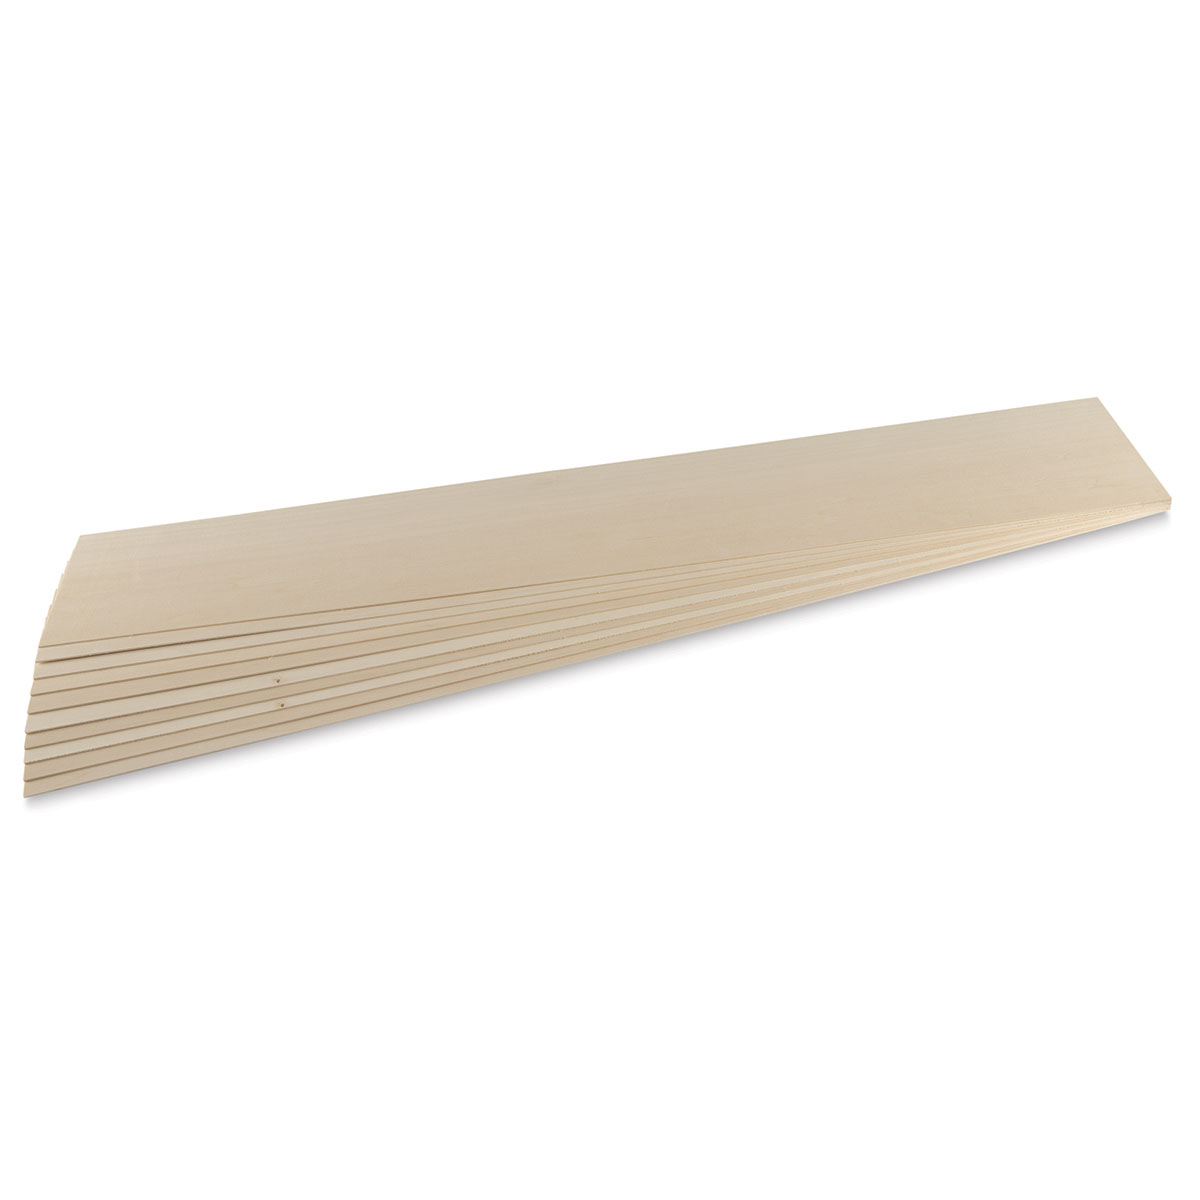 Midwest Products Genuine Basswood Sheet - 10 Sheets, 1/16 x 6 x